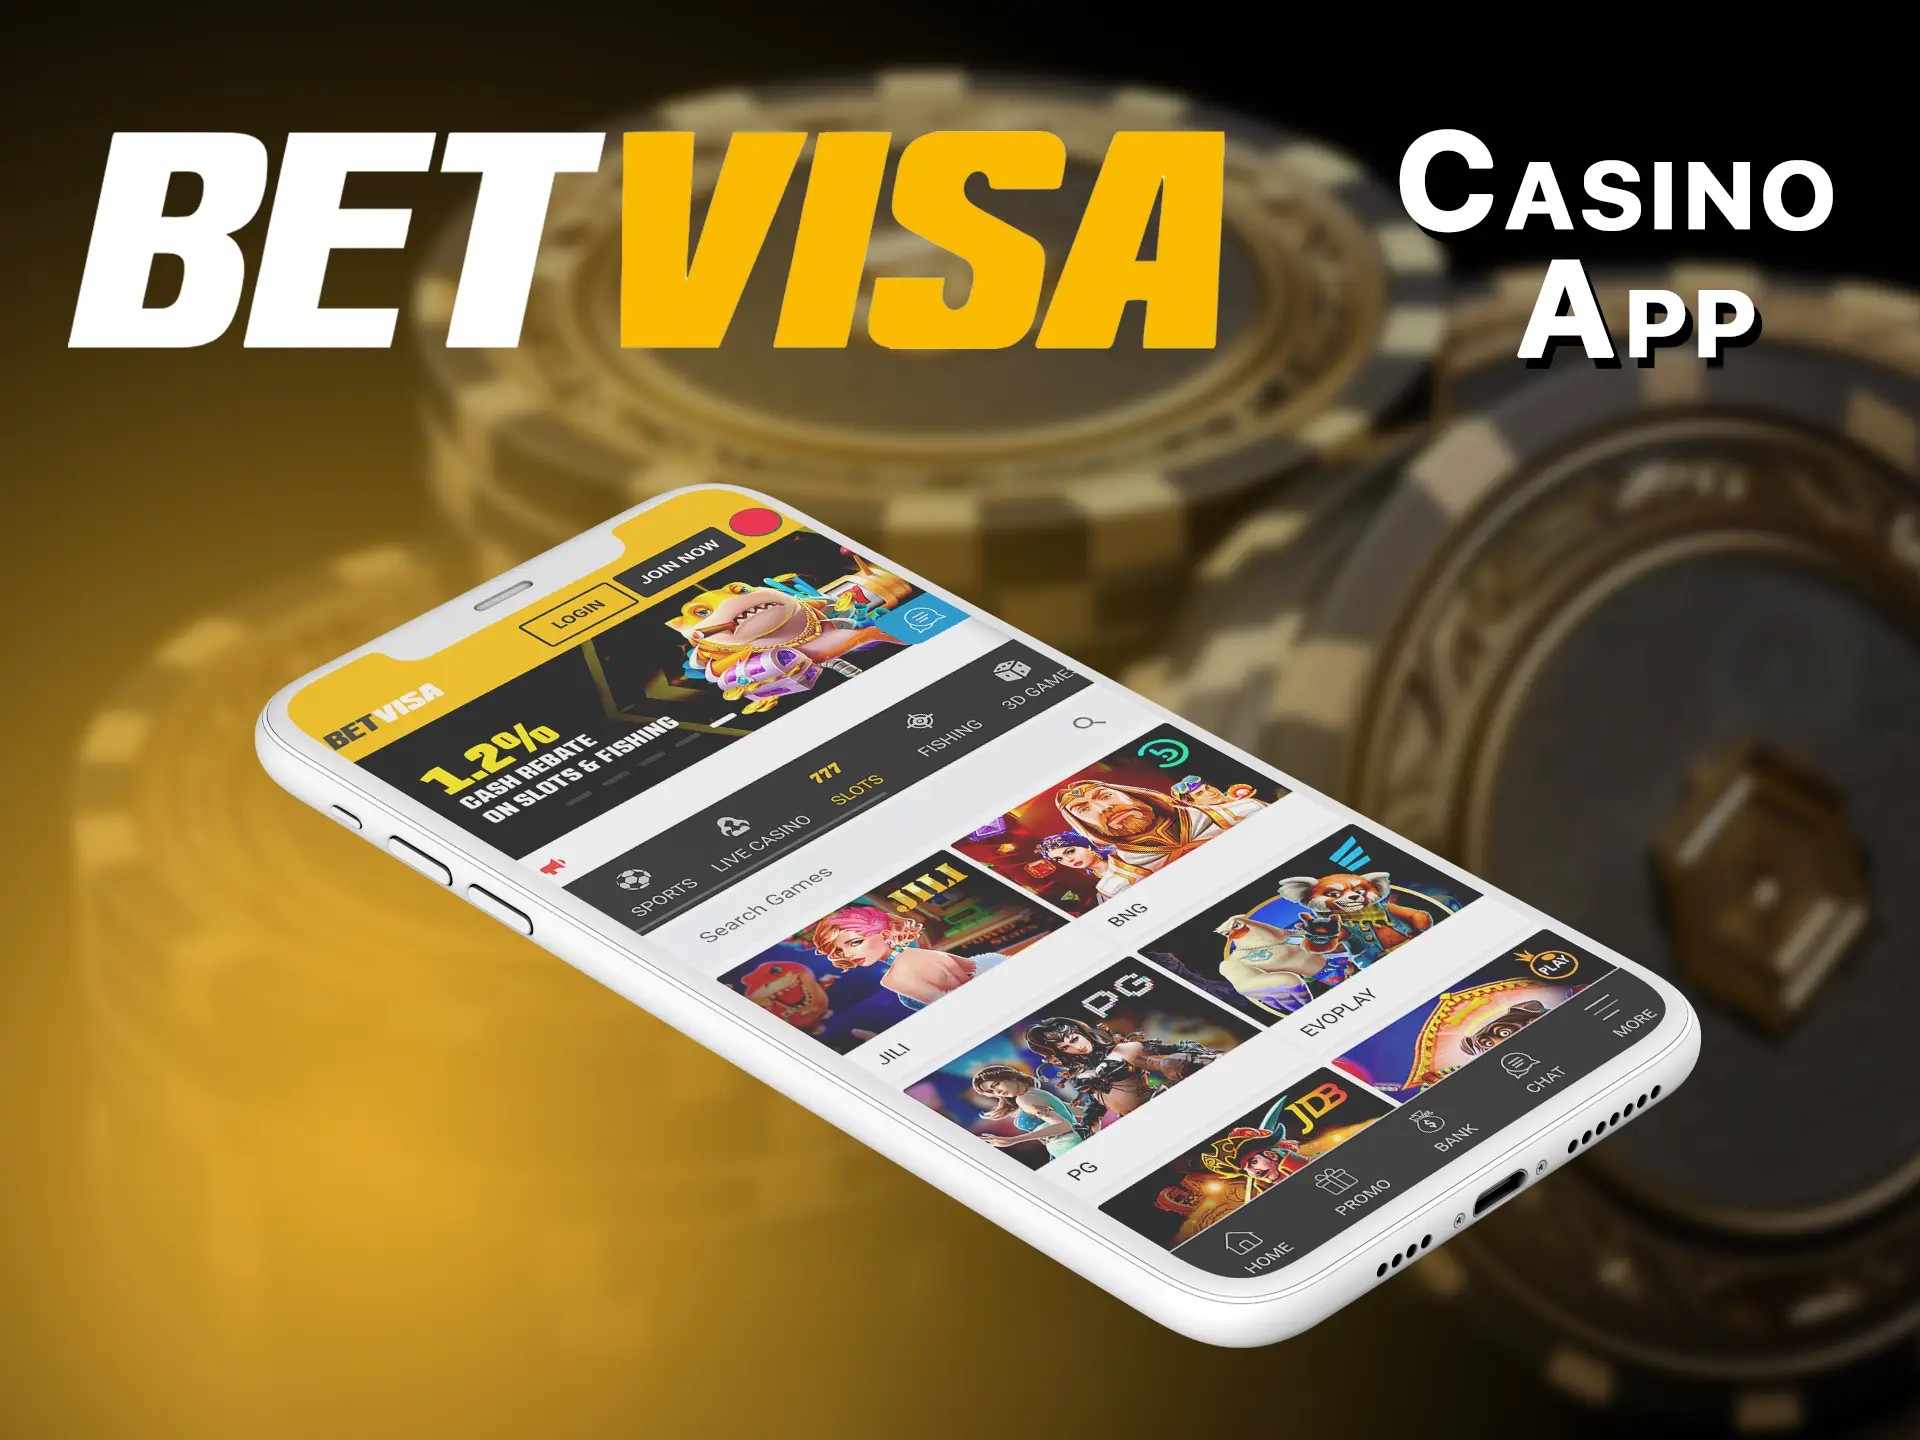 Get the official BetVisa software to conquer new heights at casinos wherever you are, right on your mobile device.